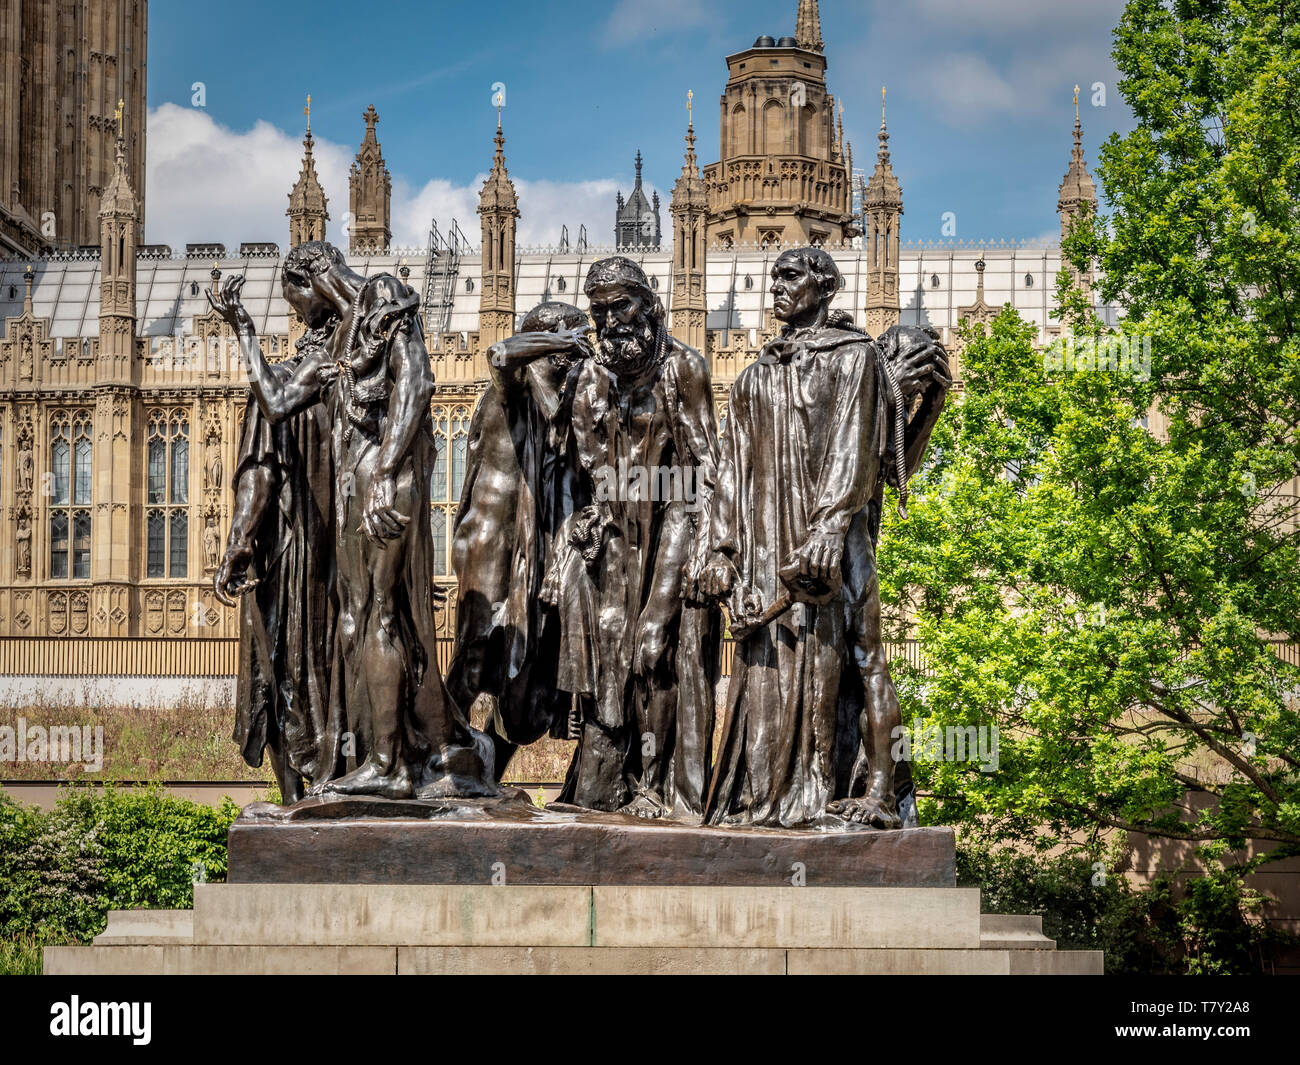 The Burghers of Calais (Les Bourgeois de Calais) bronze sculpture by Auguste Rodin 1889, situated in Victoria Tower Gardens, London. Stock Photo